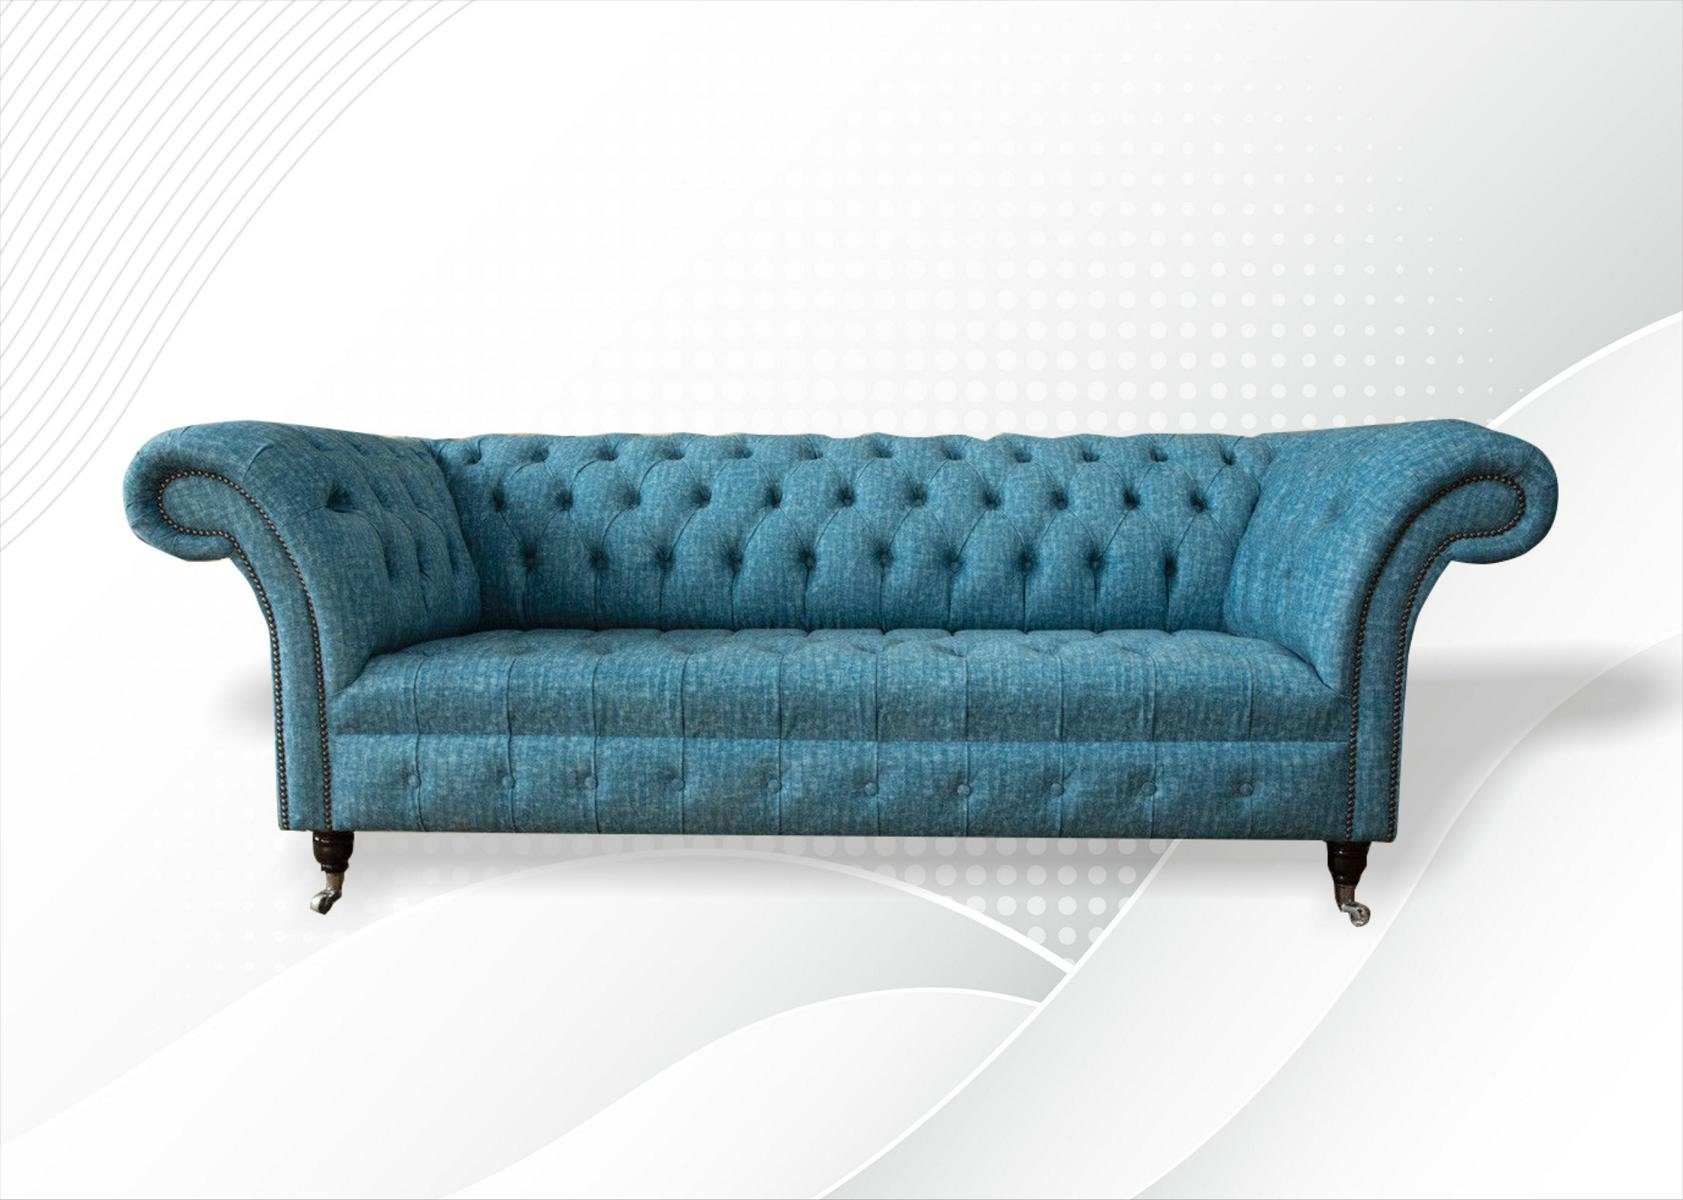 JVmoebel Sofa Moderne Blaue Chesterfield Couch luxus Polstersofa Sofa, Made in Europe